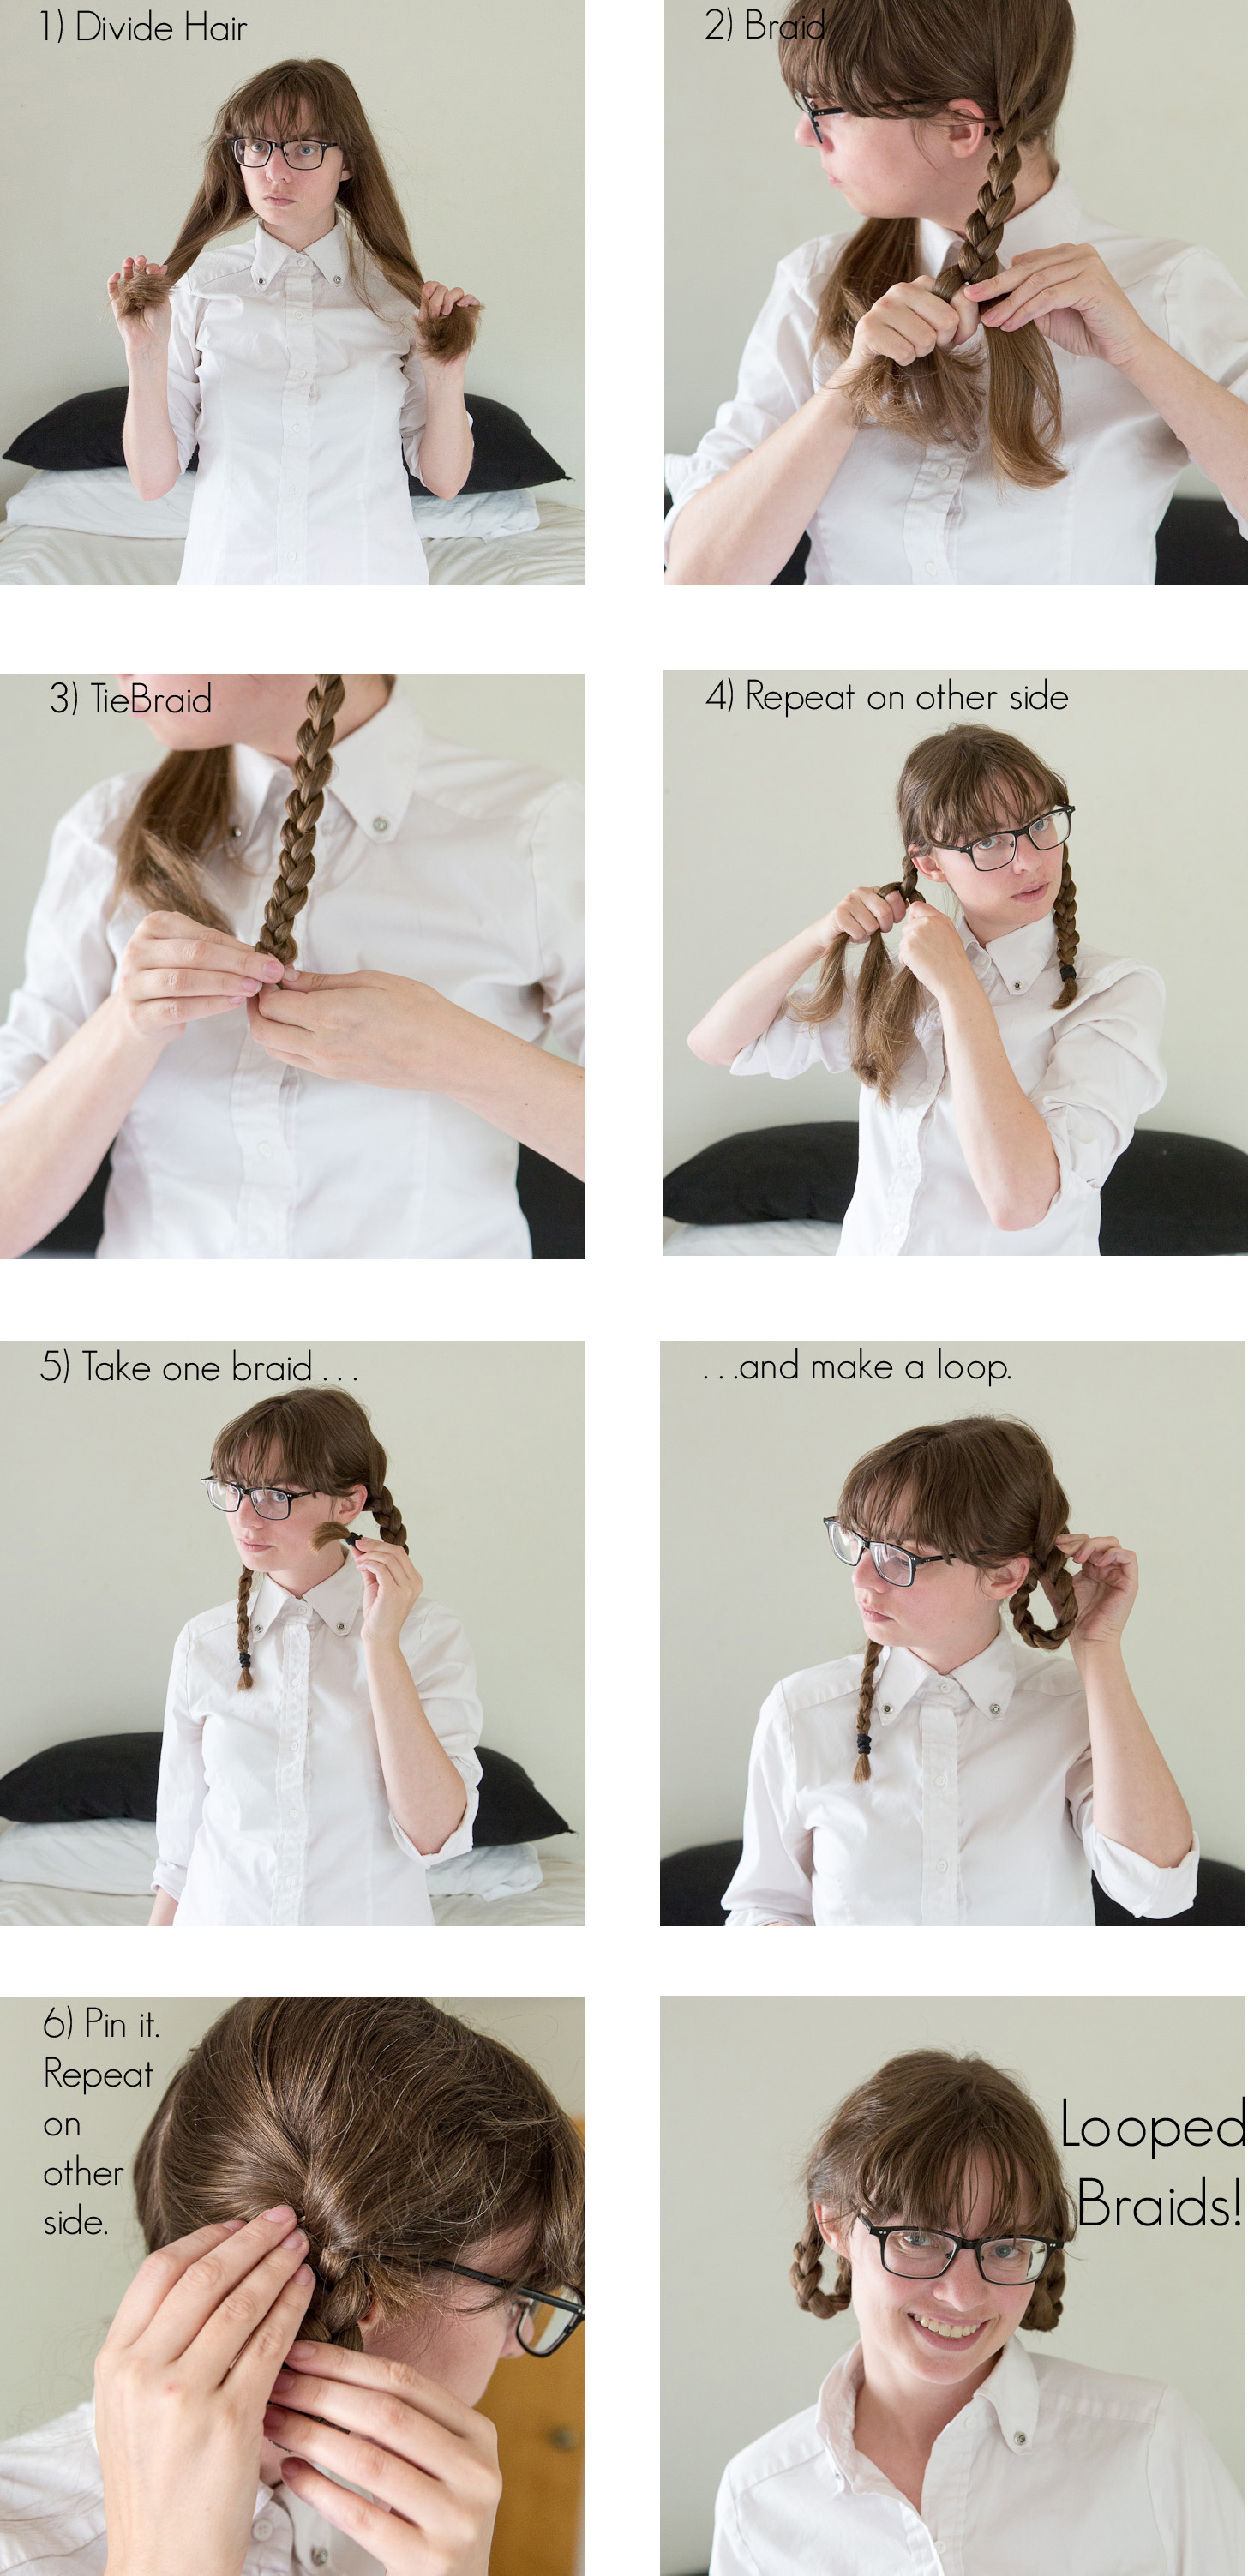 Looped Braids Instructions